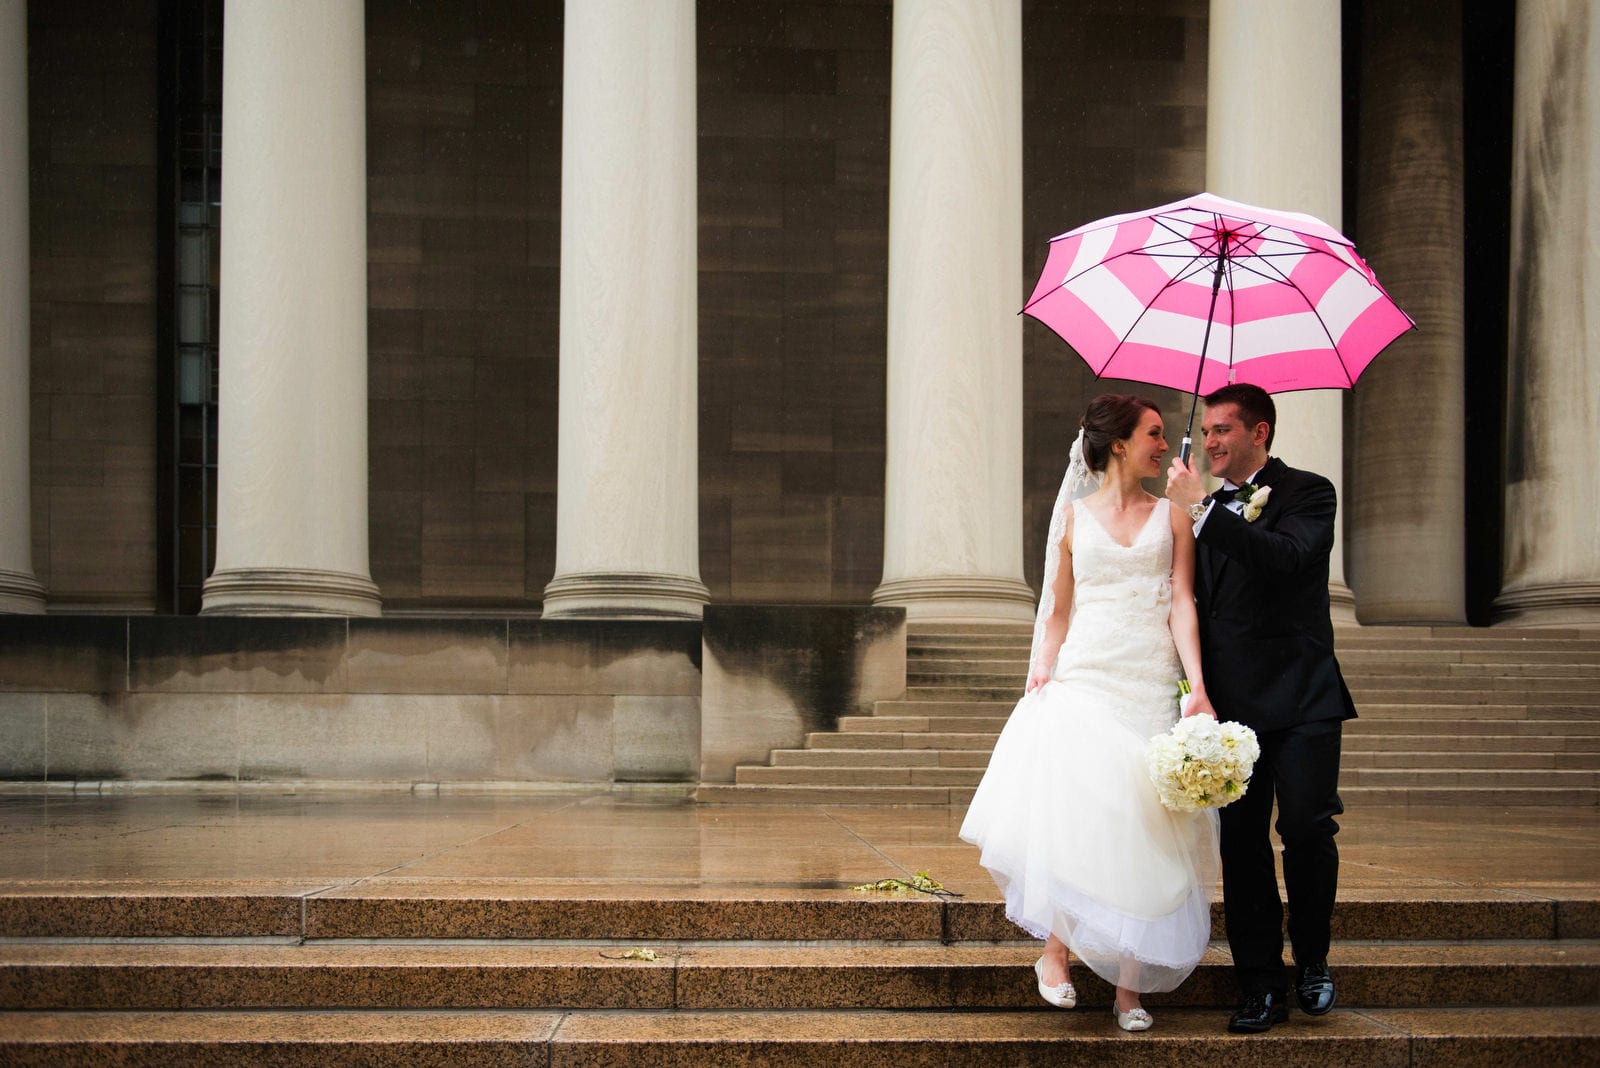 A bride and groom walk down the steps of the Mellon Institute in the rain. He holds a pink and white umbrella over them.